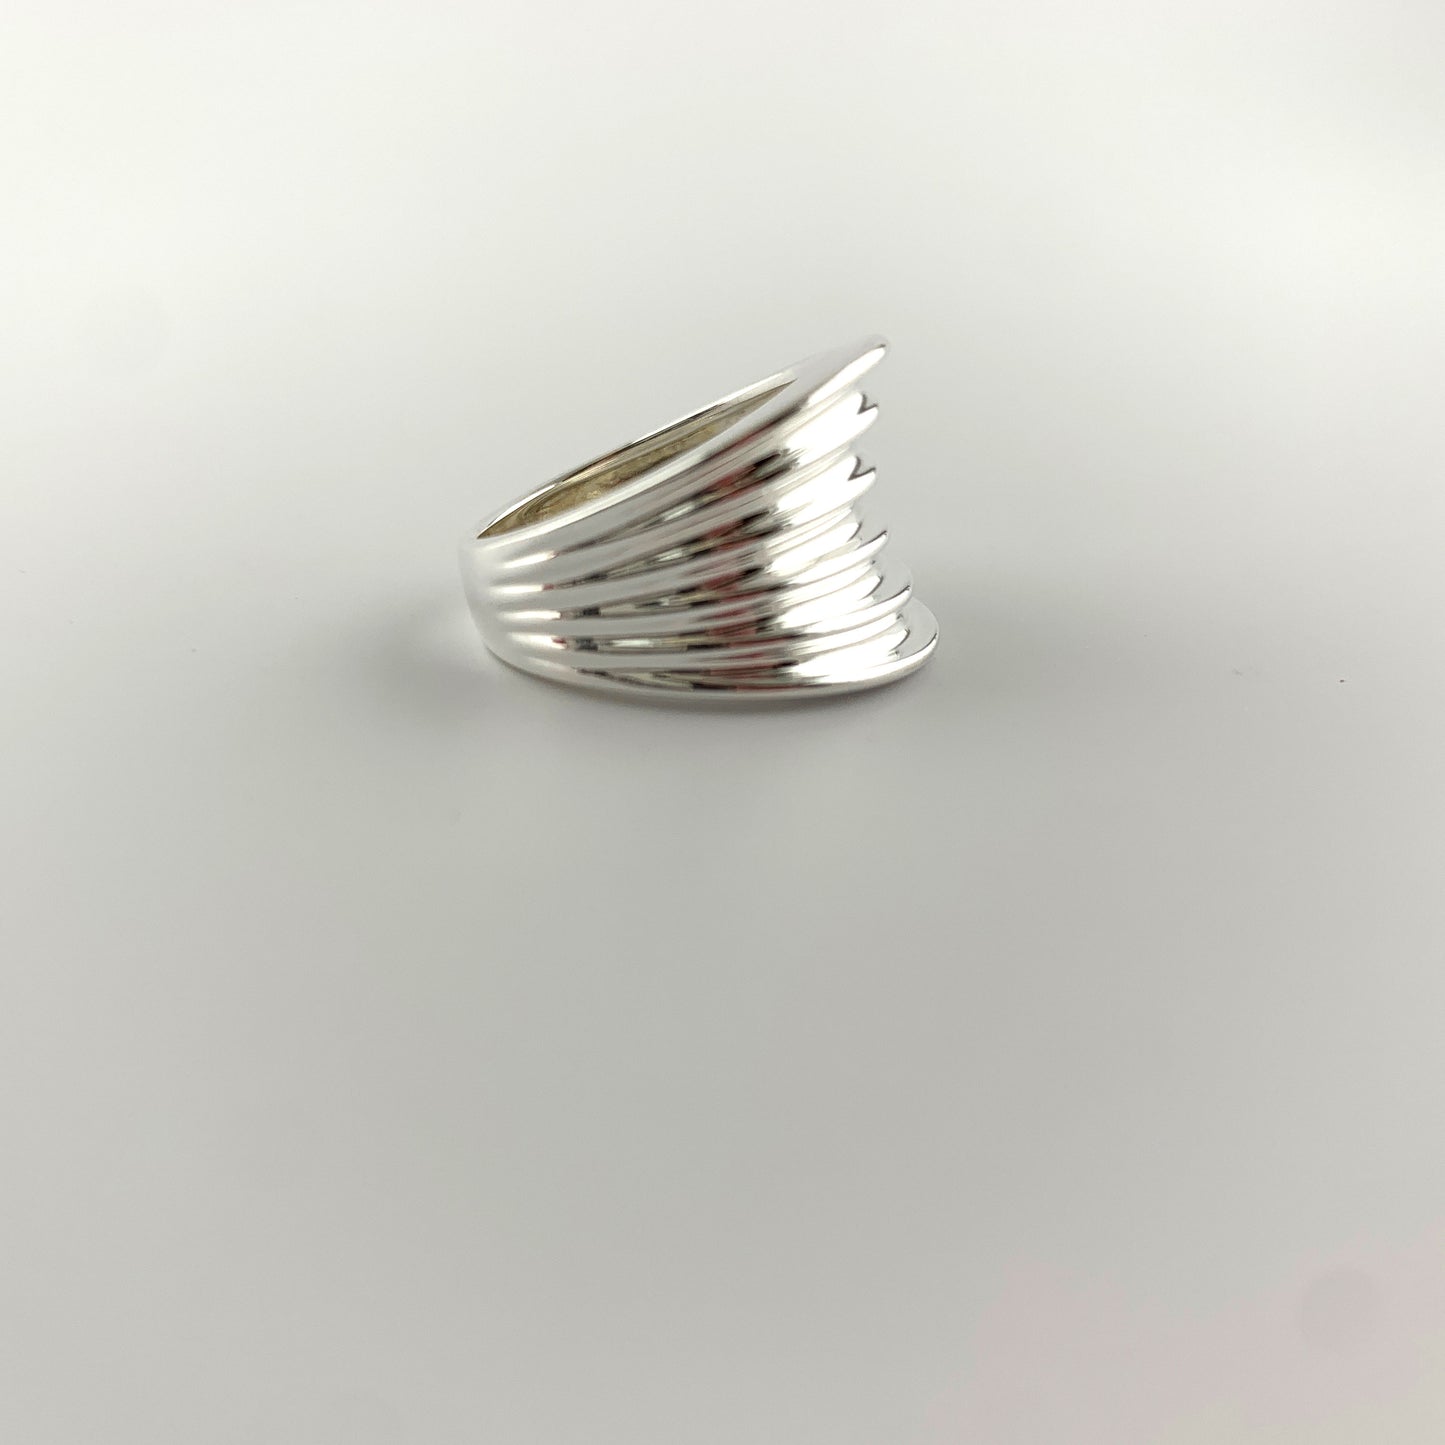 Vintage Sterling Silver Ring Size 6.5, PAJ-0110-1646781949 - AriaDesignCollection